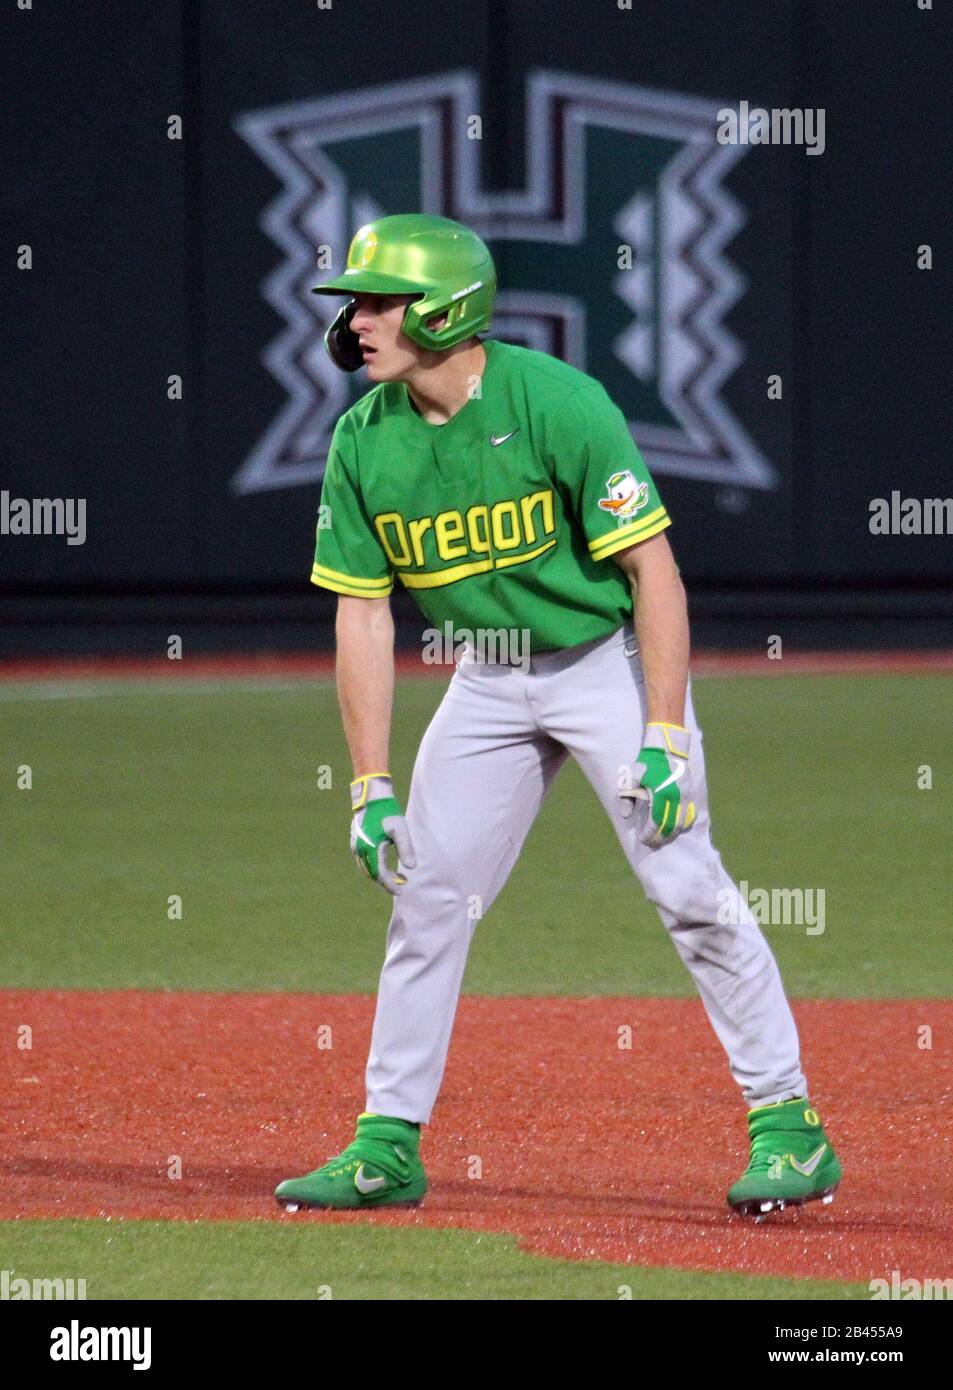 March 5, 2020 - Oregon Ducks outfielder Tanner Smith (31) looks in on the pitch during a game between the Oregon Ducks and the Hawaii Rainbow Warriors at Les Murakami Stadium in Honolulu, HI - Michael Sullivan/CSM Stock Photo